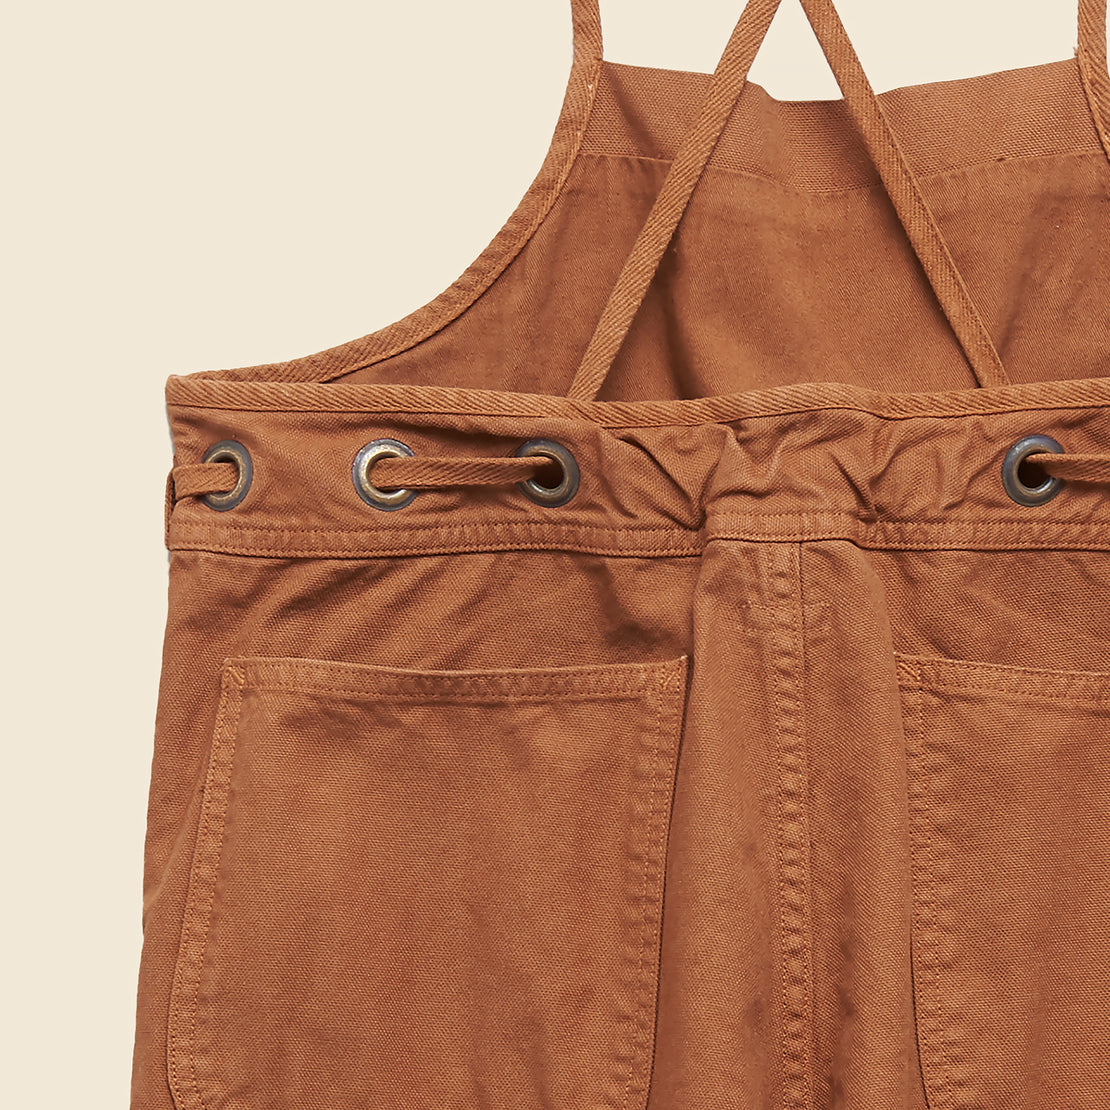 Lightweight Canvas Welder Overall - Leather Brown - Kapital - STAG Provisions - W - Onepiece - Overalls